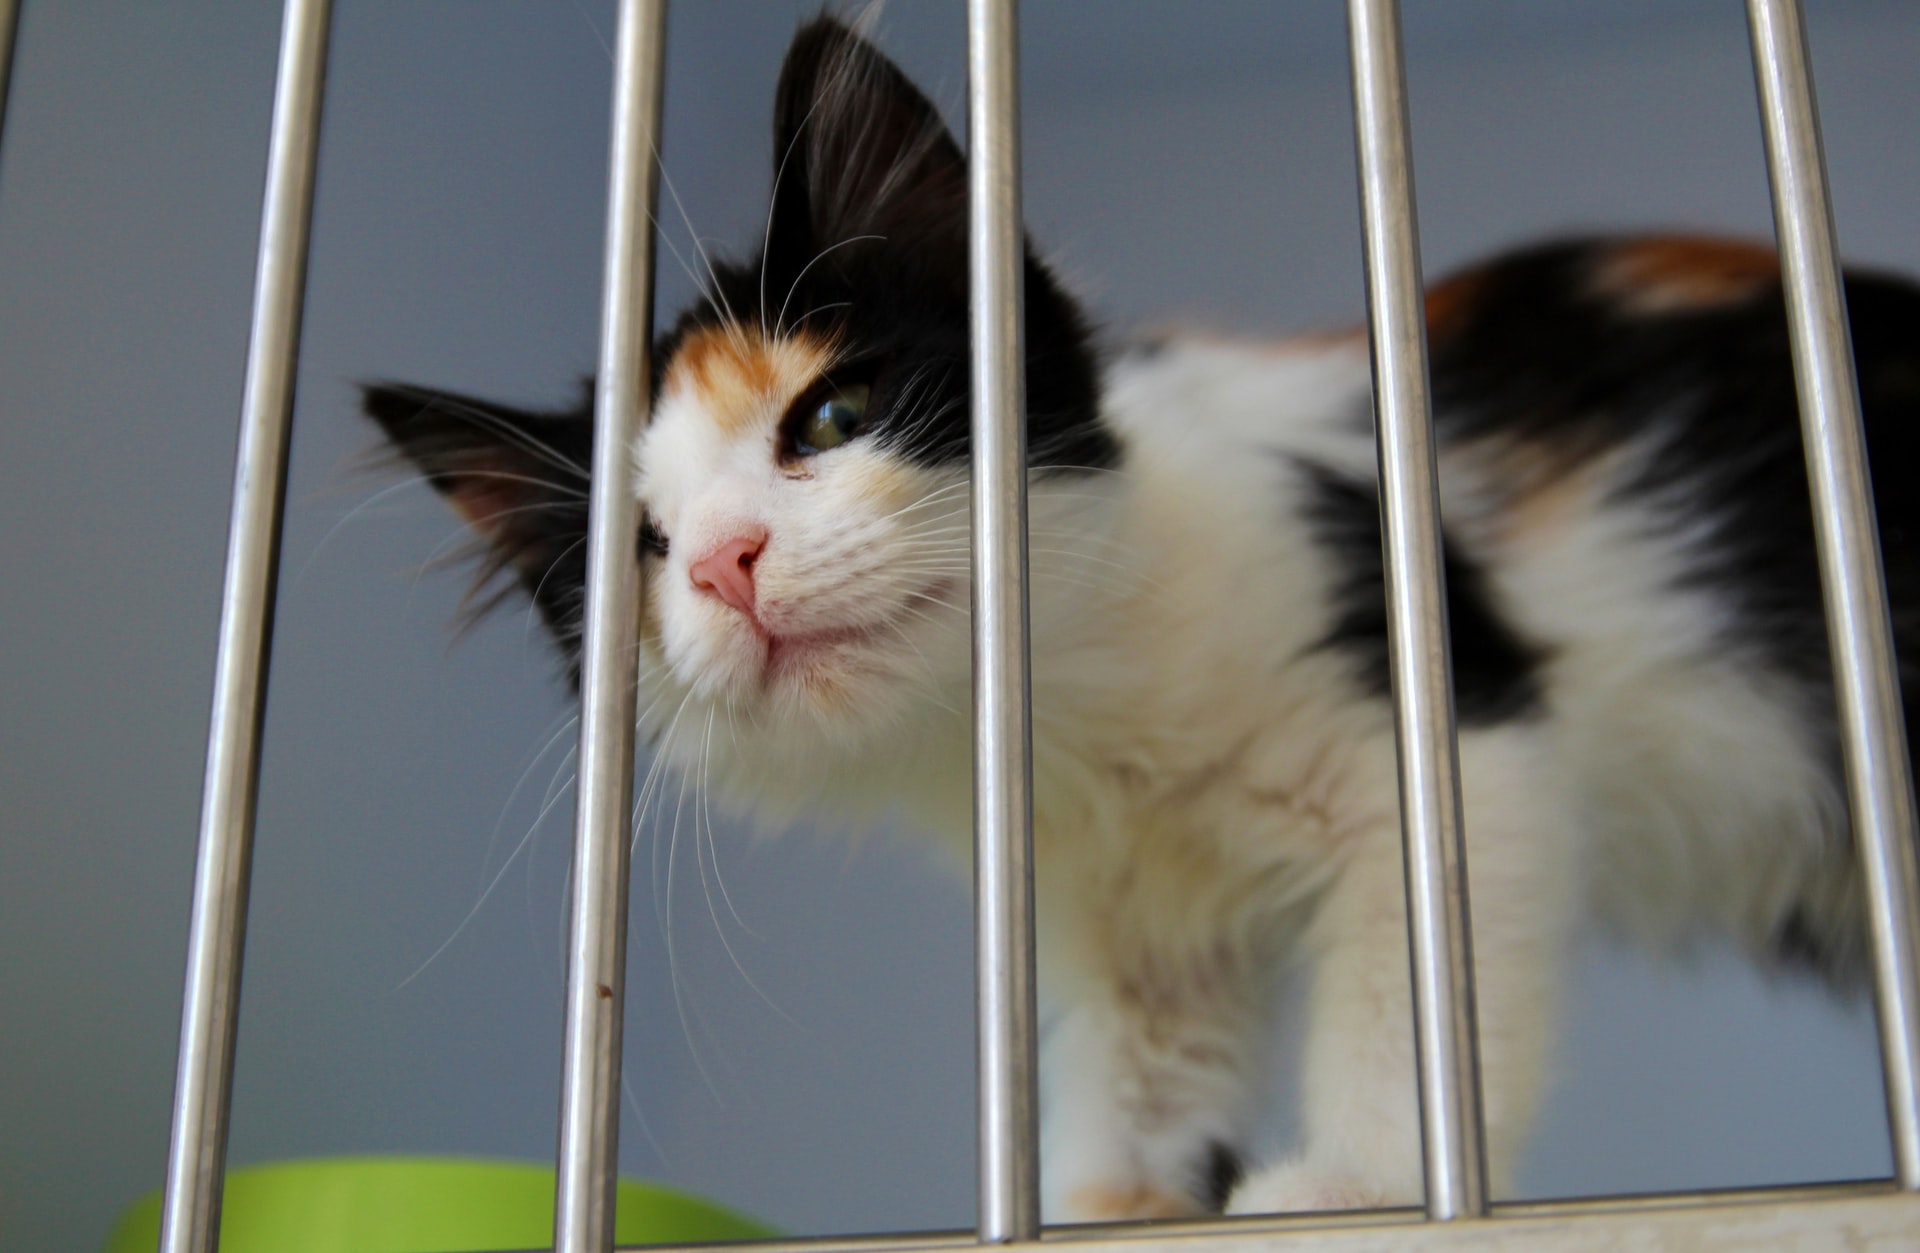 Photo of a kitten in a crate for an article about helping homeless cats.